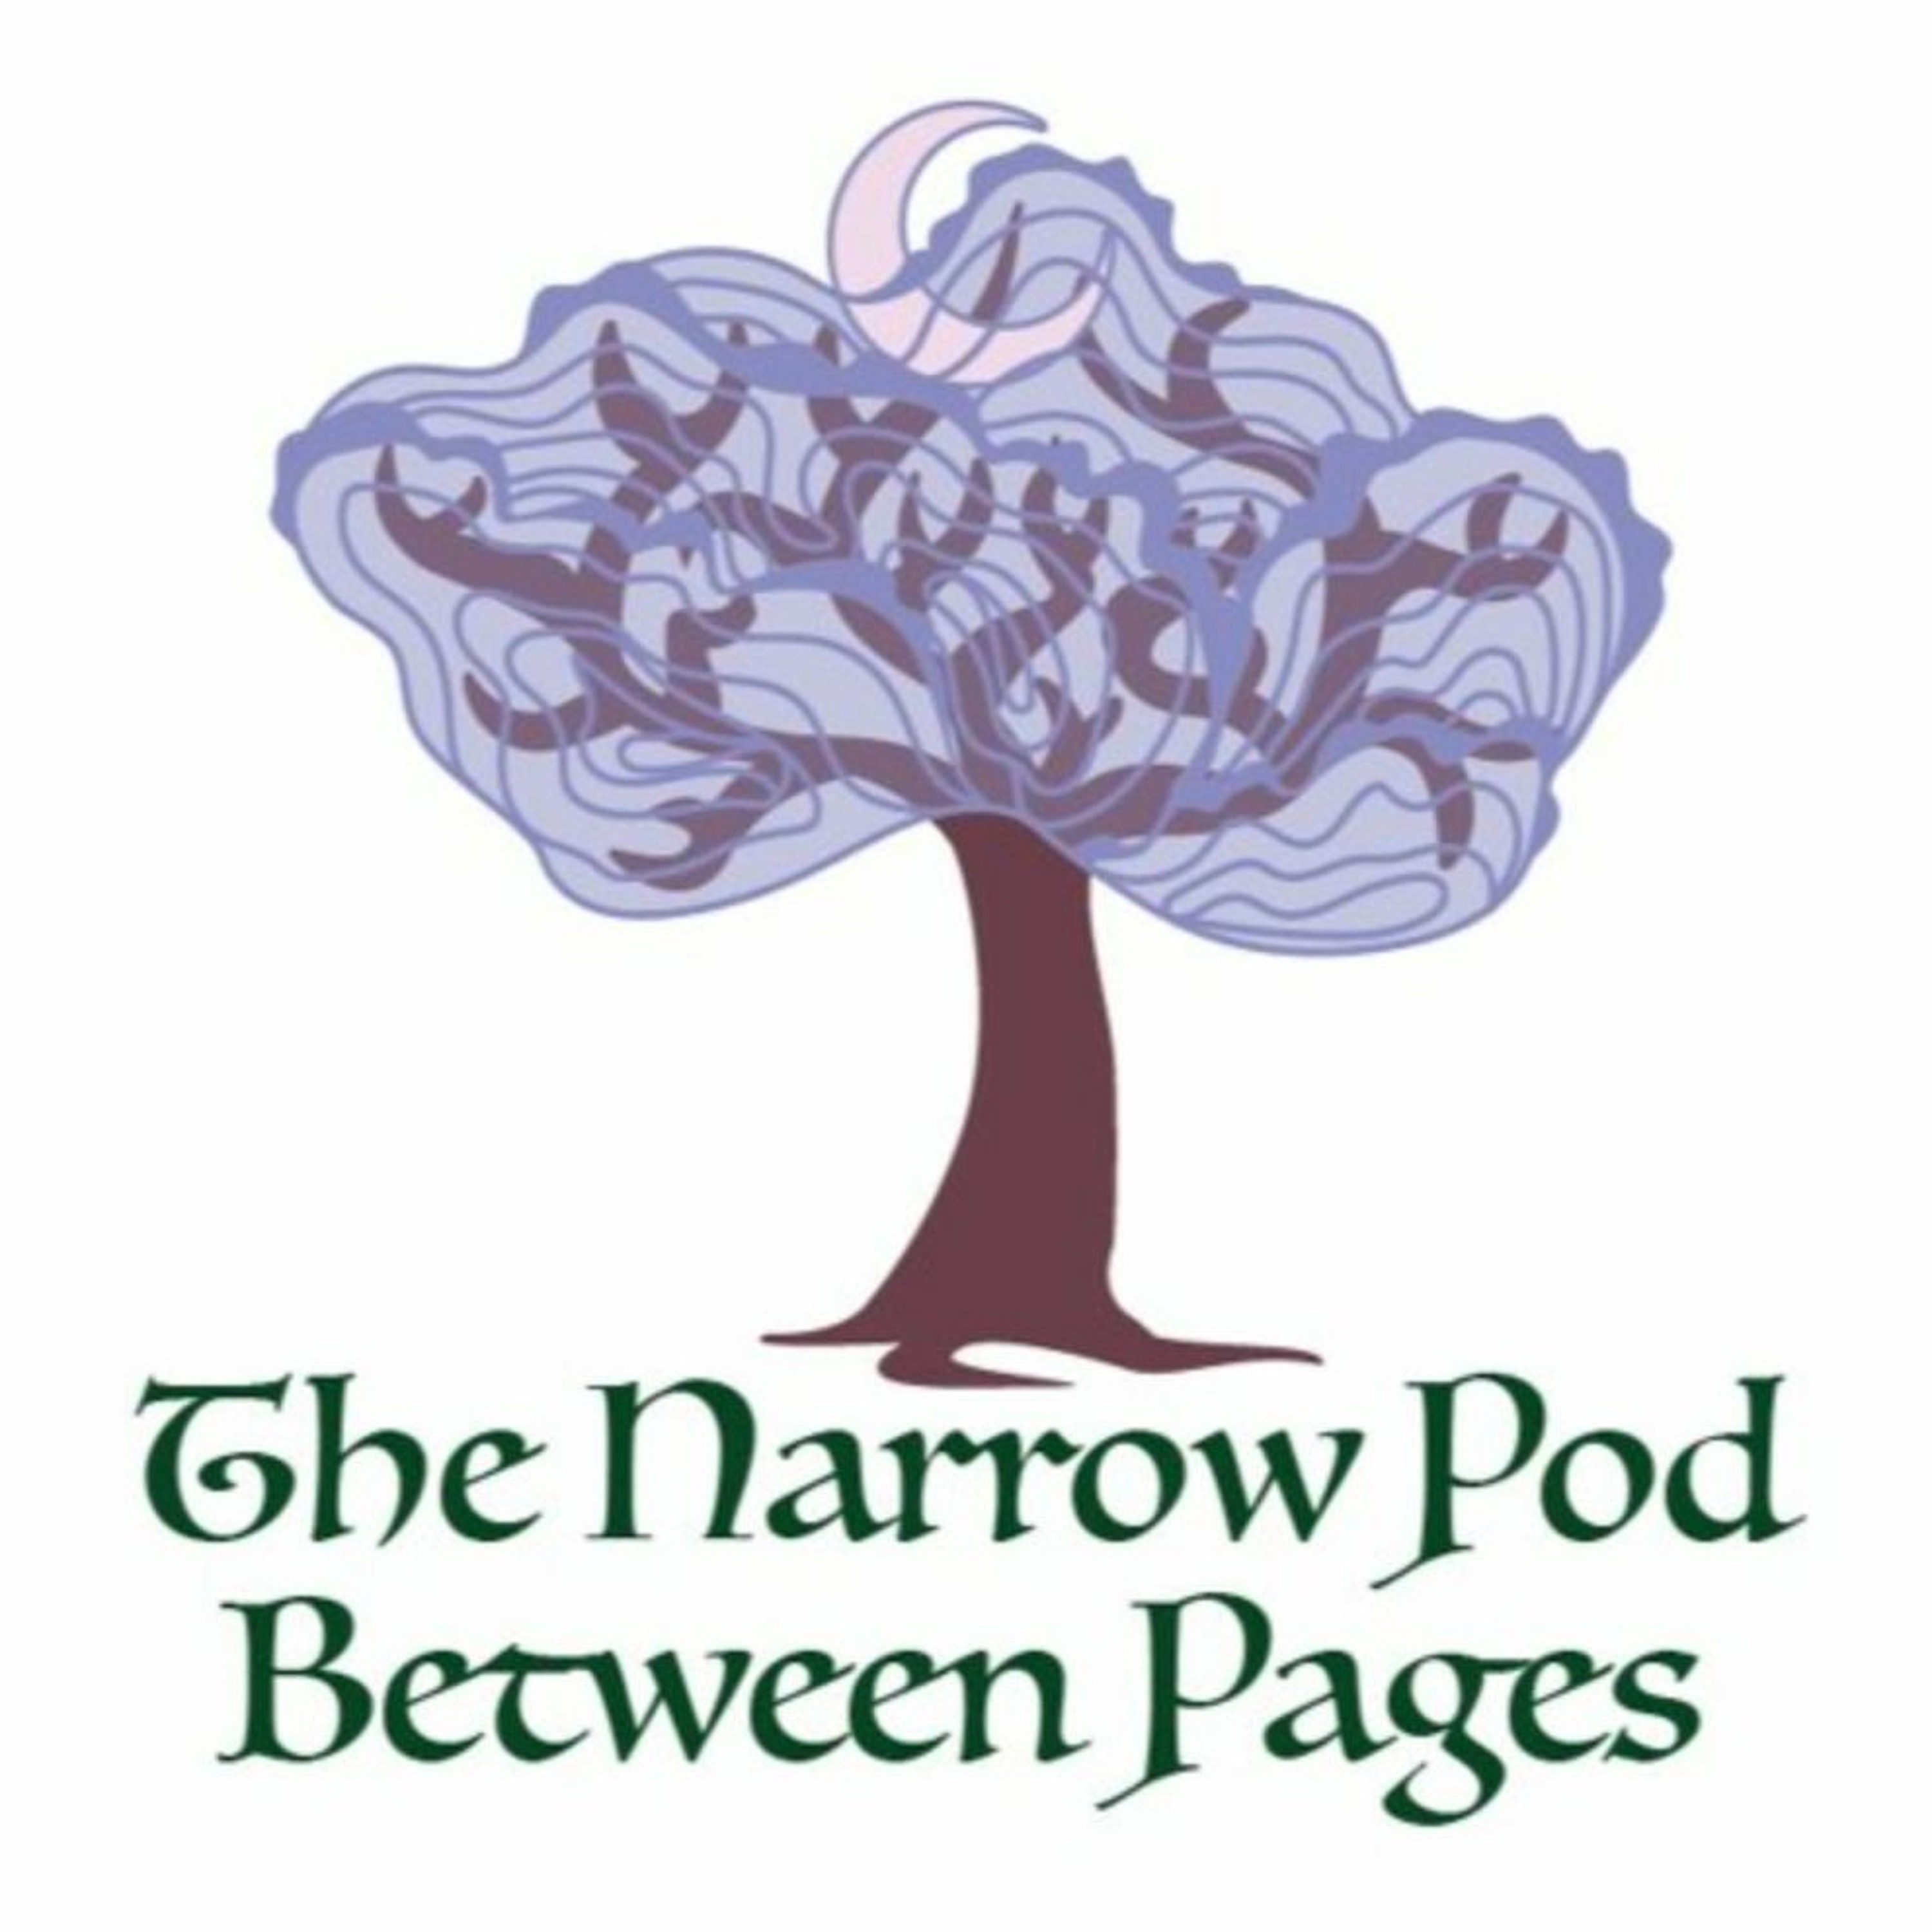 The Narrow Pod Between Pages - Page 174-175: There may come a day when the strength of men fails